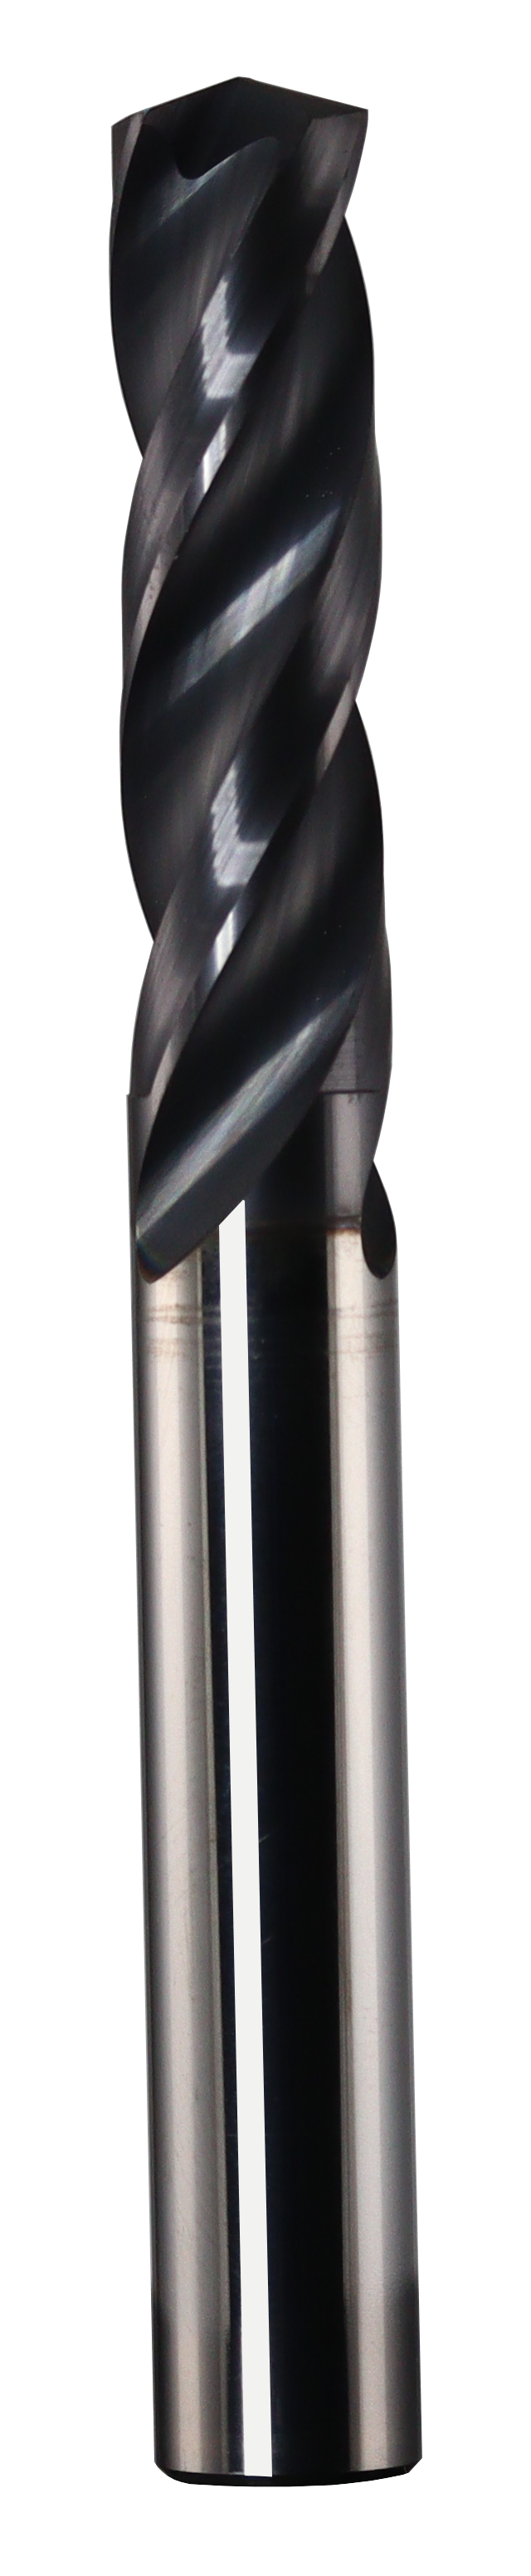 10.10mm Dia, 150 Degree Point, Solid Carbide Drill - 69036